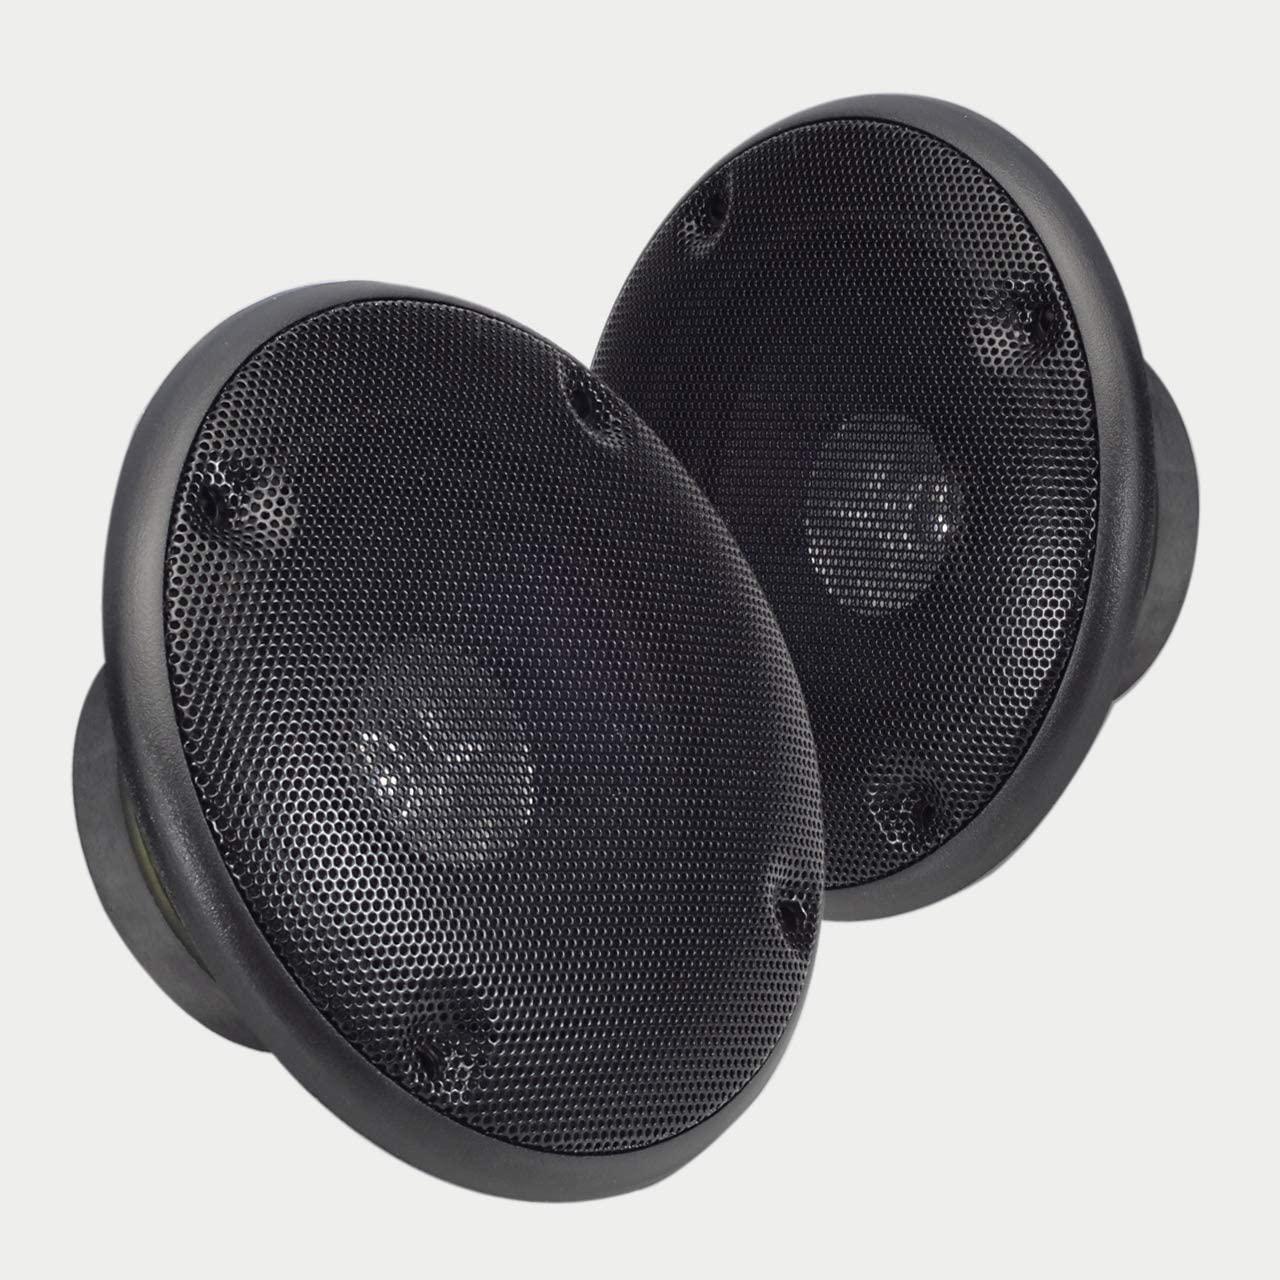 Magnadyne, MAGNADYNE AS590B 4 INCH Black Dual Cone Speaker Sold AS A Pair (Includes Grill and Mount Screws)